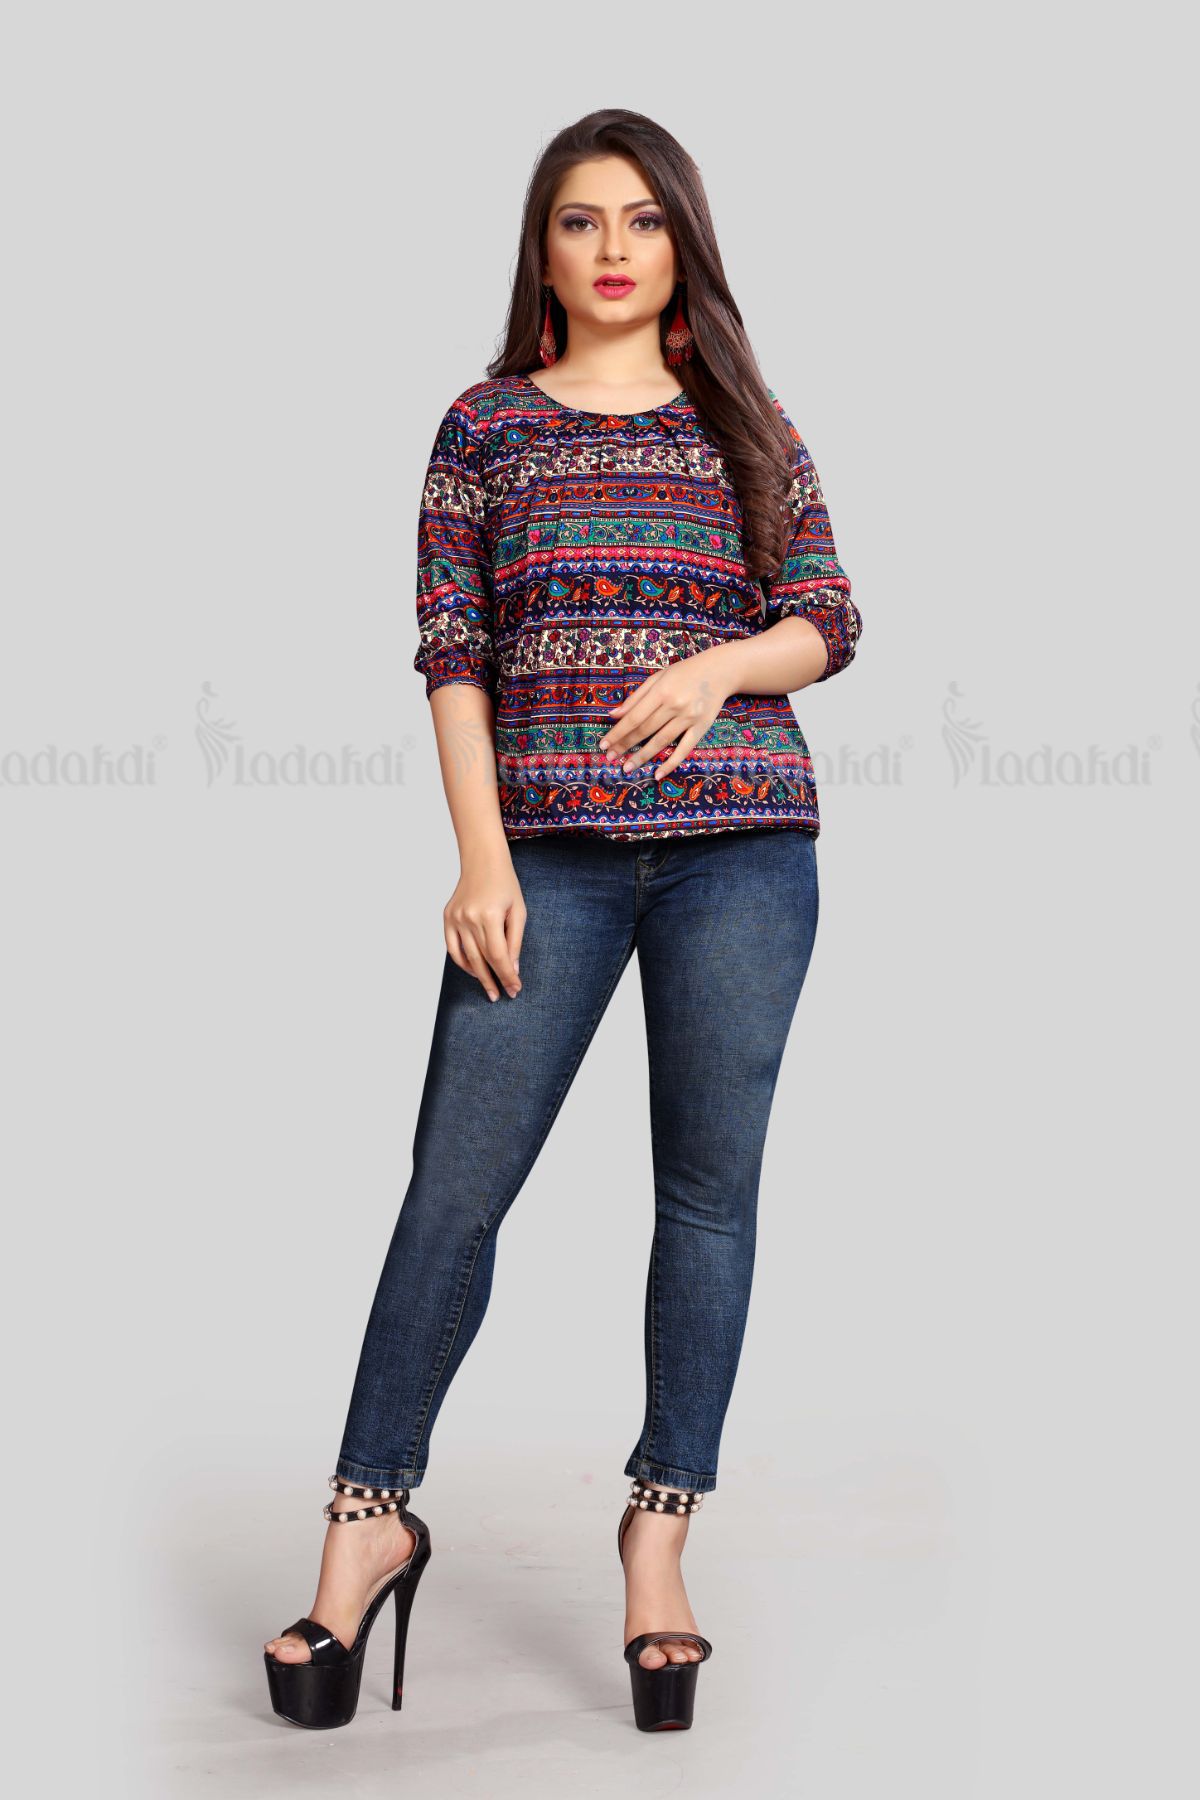 Designer Party Wear Top and Jeans at Rs 460/set | Kids Jeans in Howrah |  ID: 22452617812